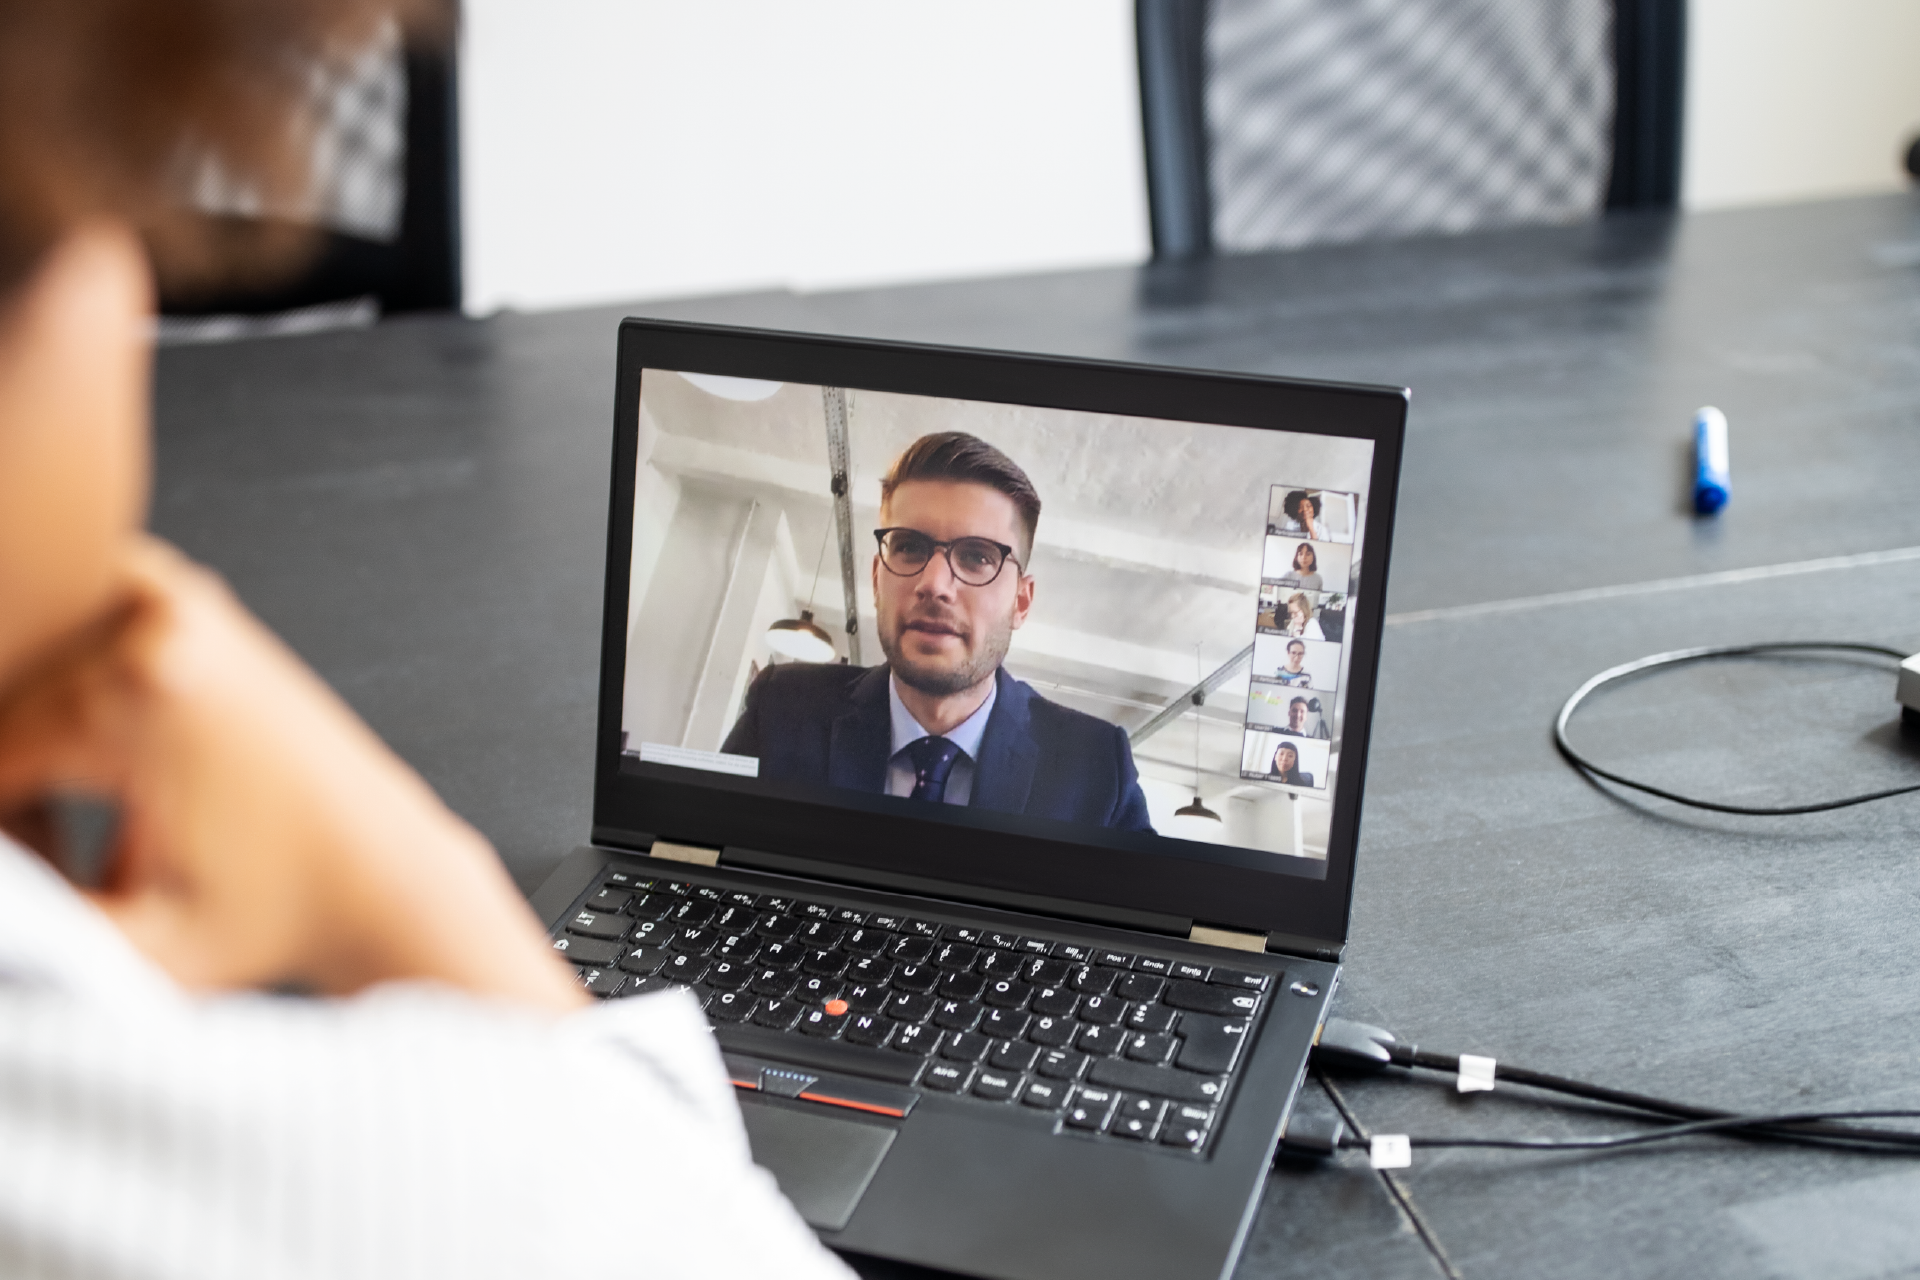 A virtual meeting between a case manager and an identity recovery victim